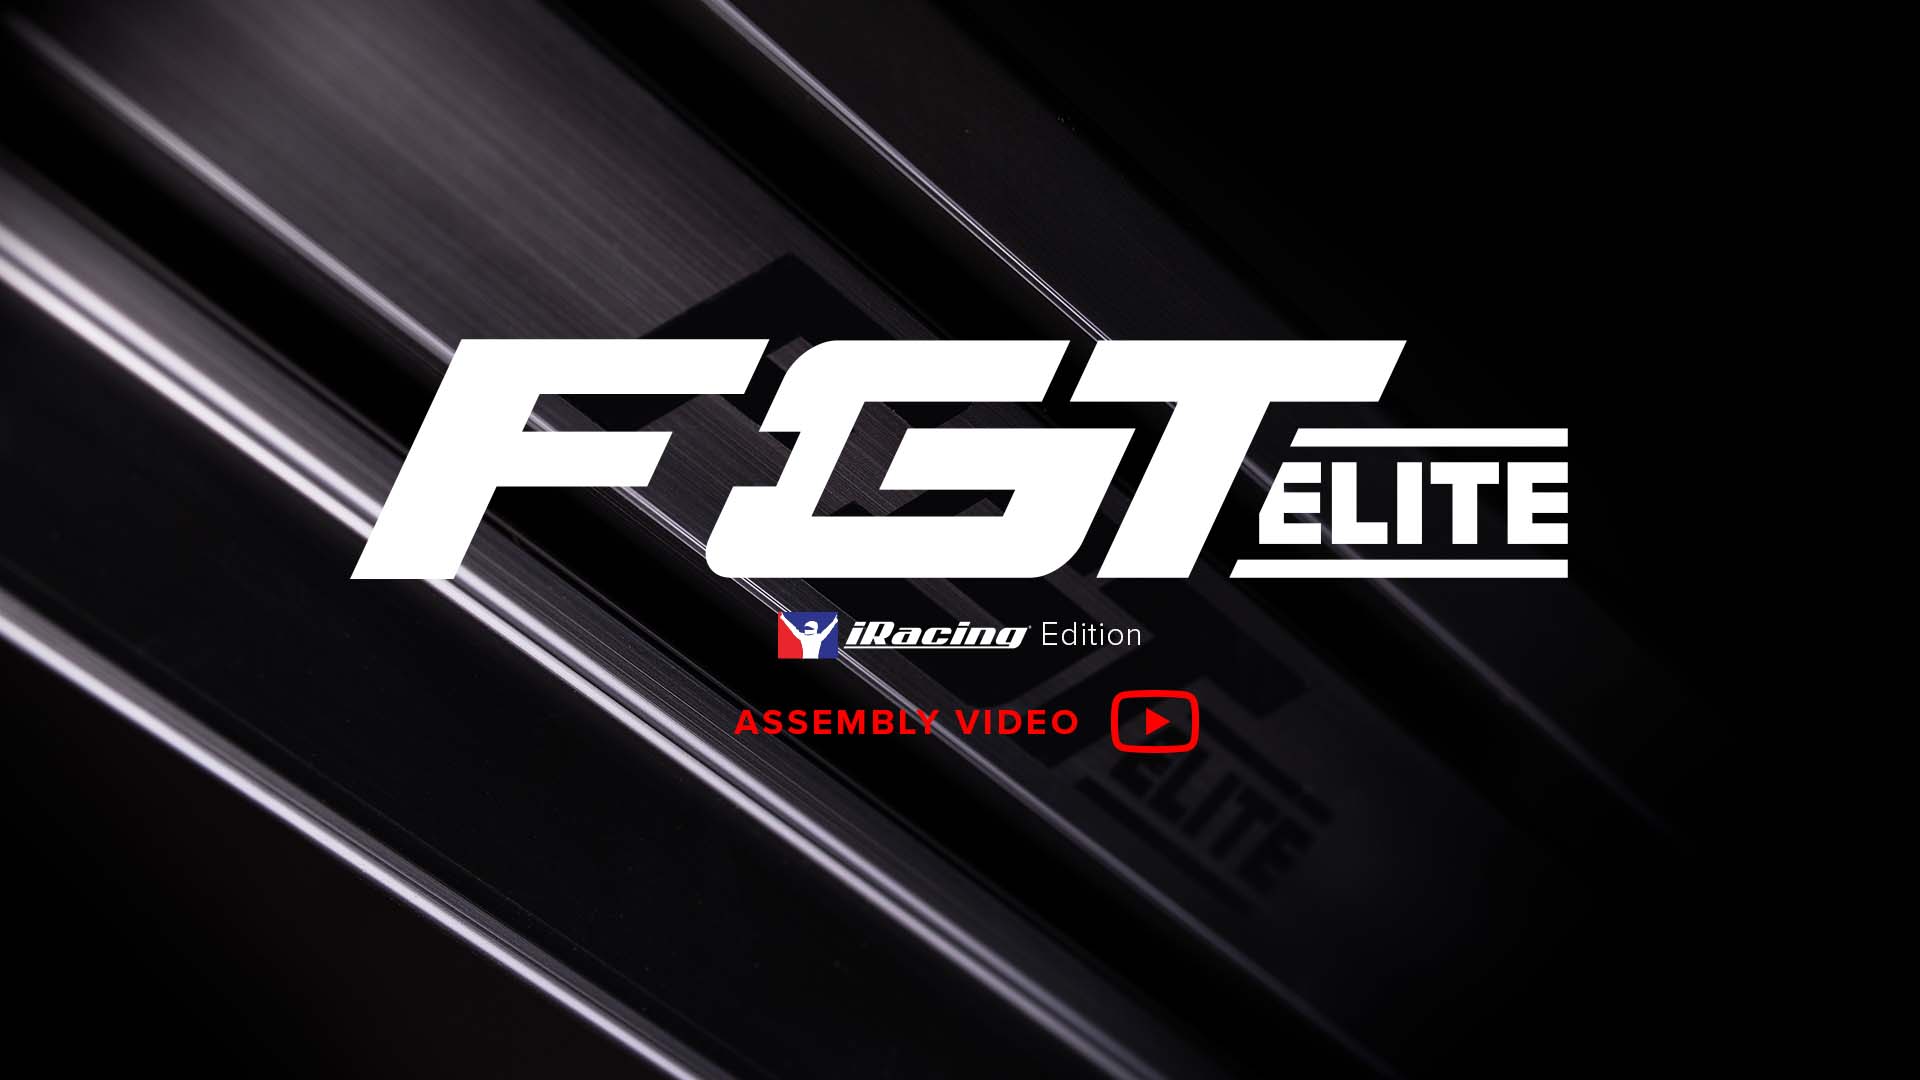 Fgt Lite Assembly Video Firacing Edition